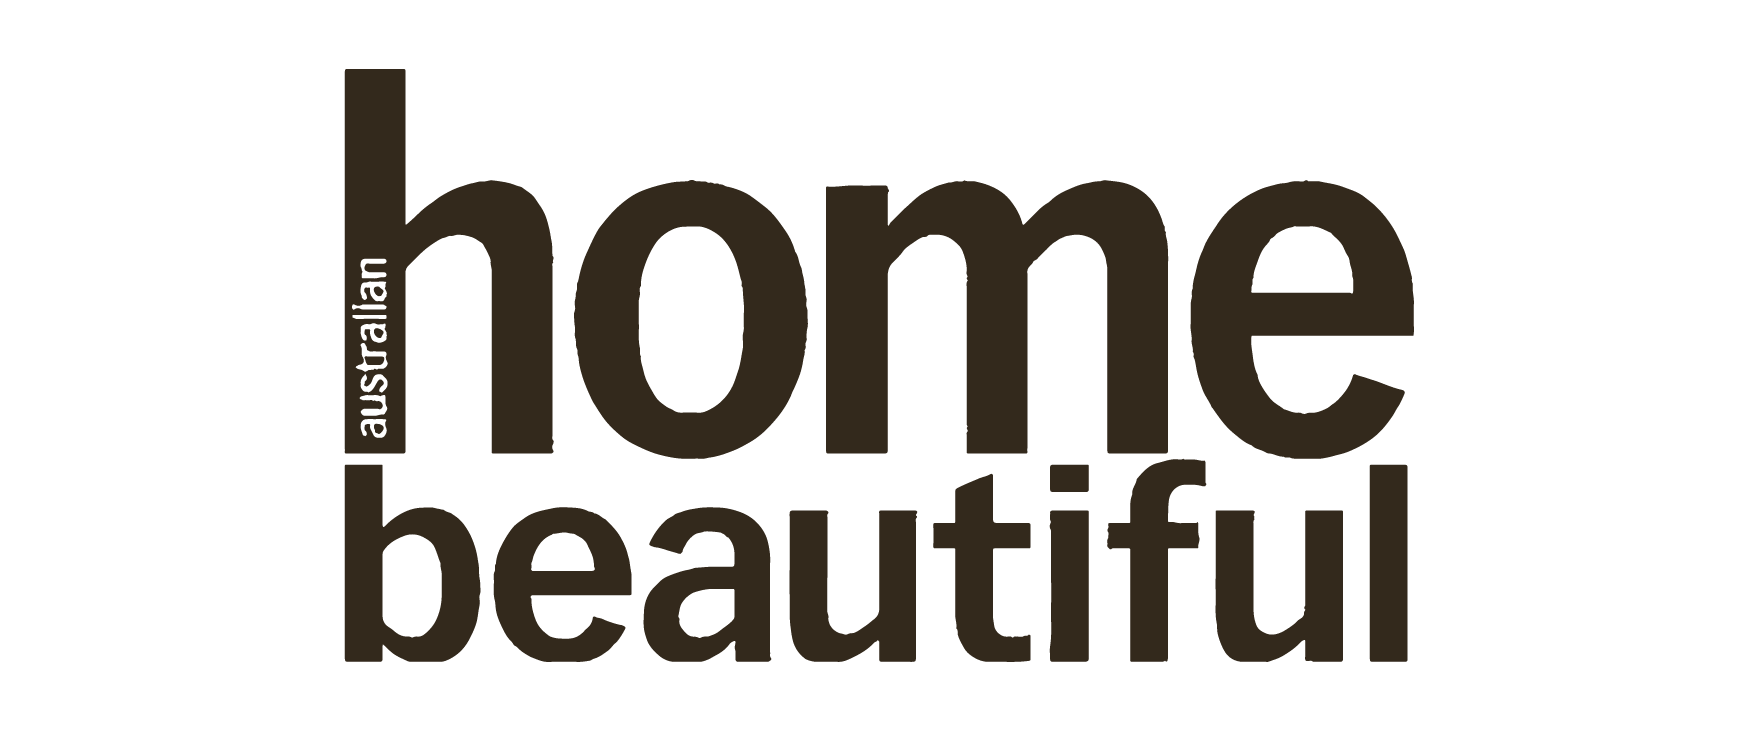 The image features a dark brown logo with the words "home beautiful" in large, lowercase letters. The word "australian" is written vertically in much smaller letters to the left of "home". This stylish logo could easily be associated with a Sydney duplex architect known for the best duplex designs. The background is transparent.